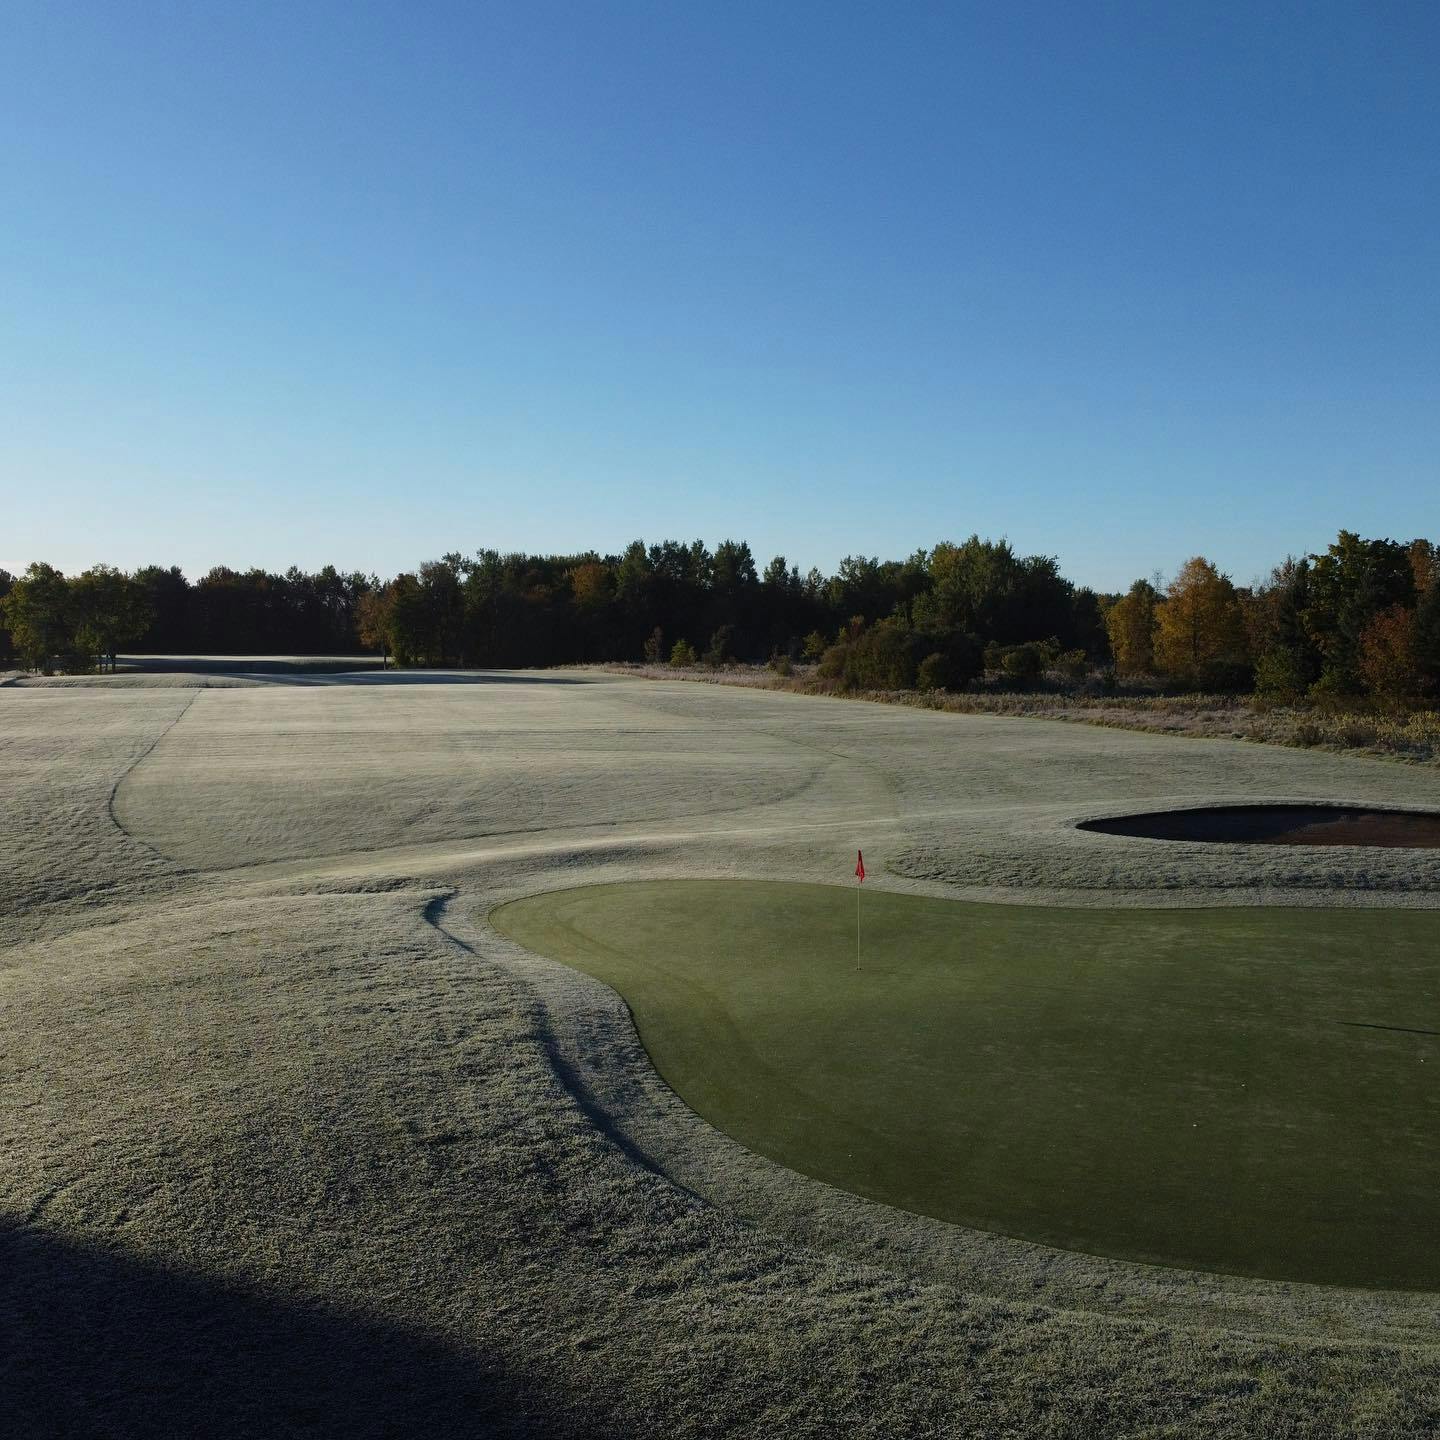 October frost delay on 2 south 🥶